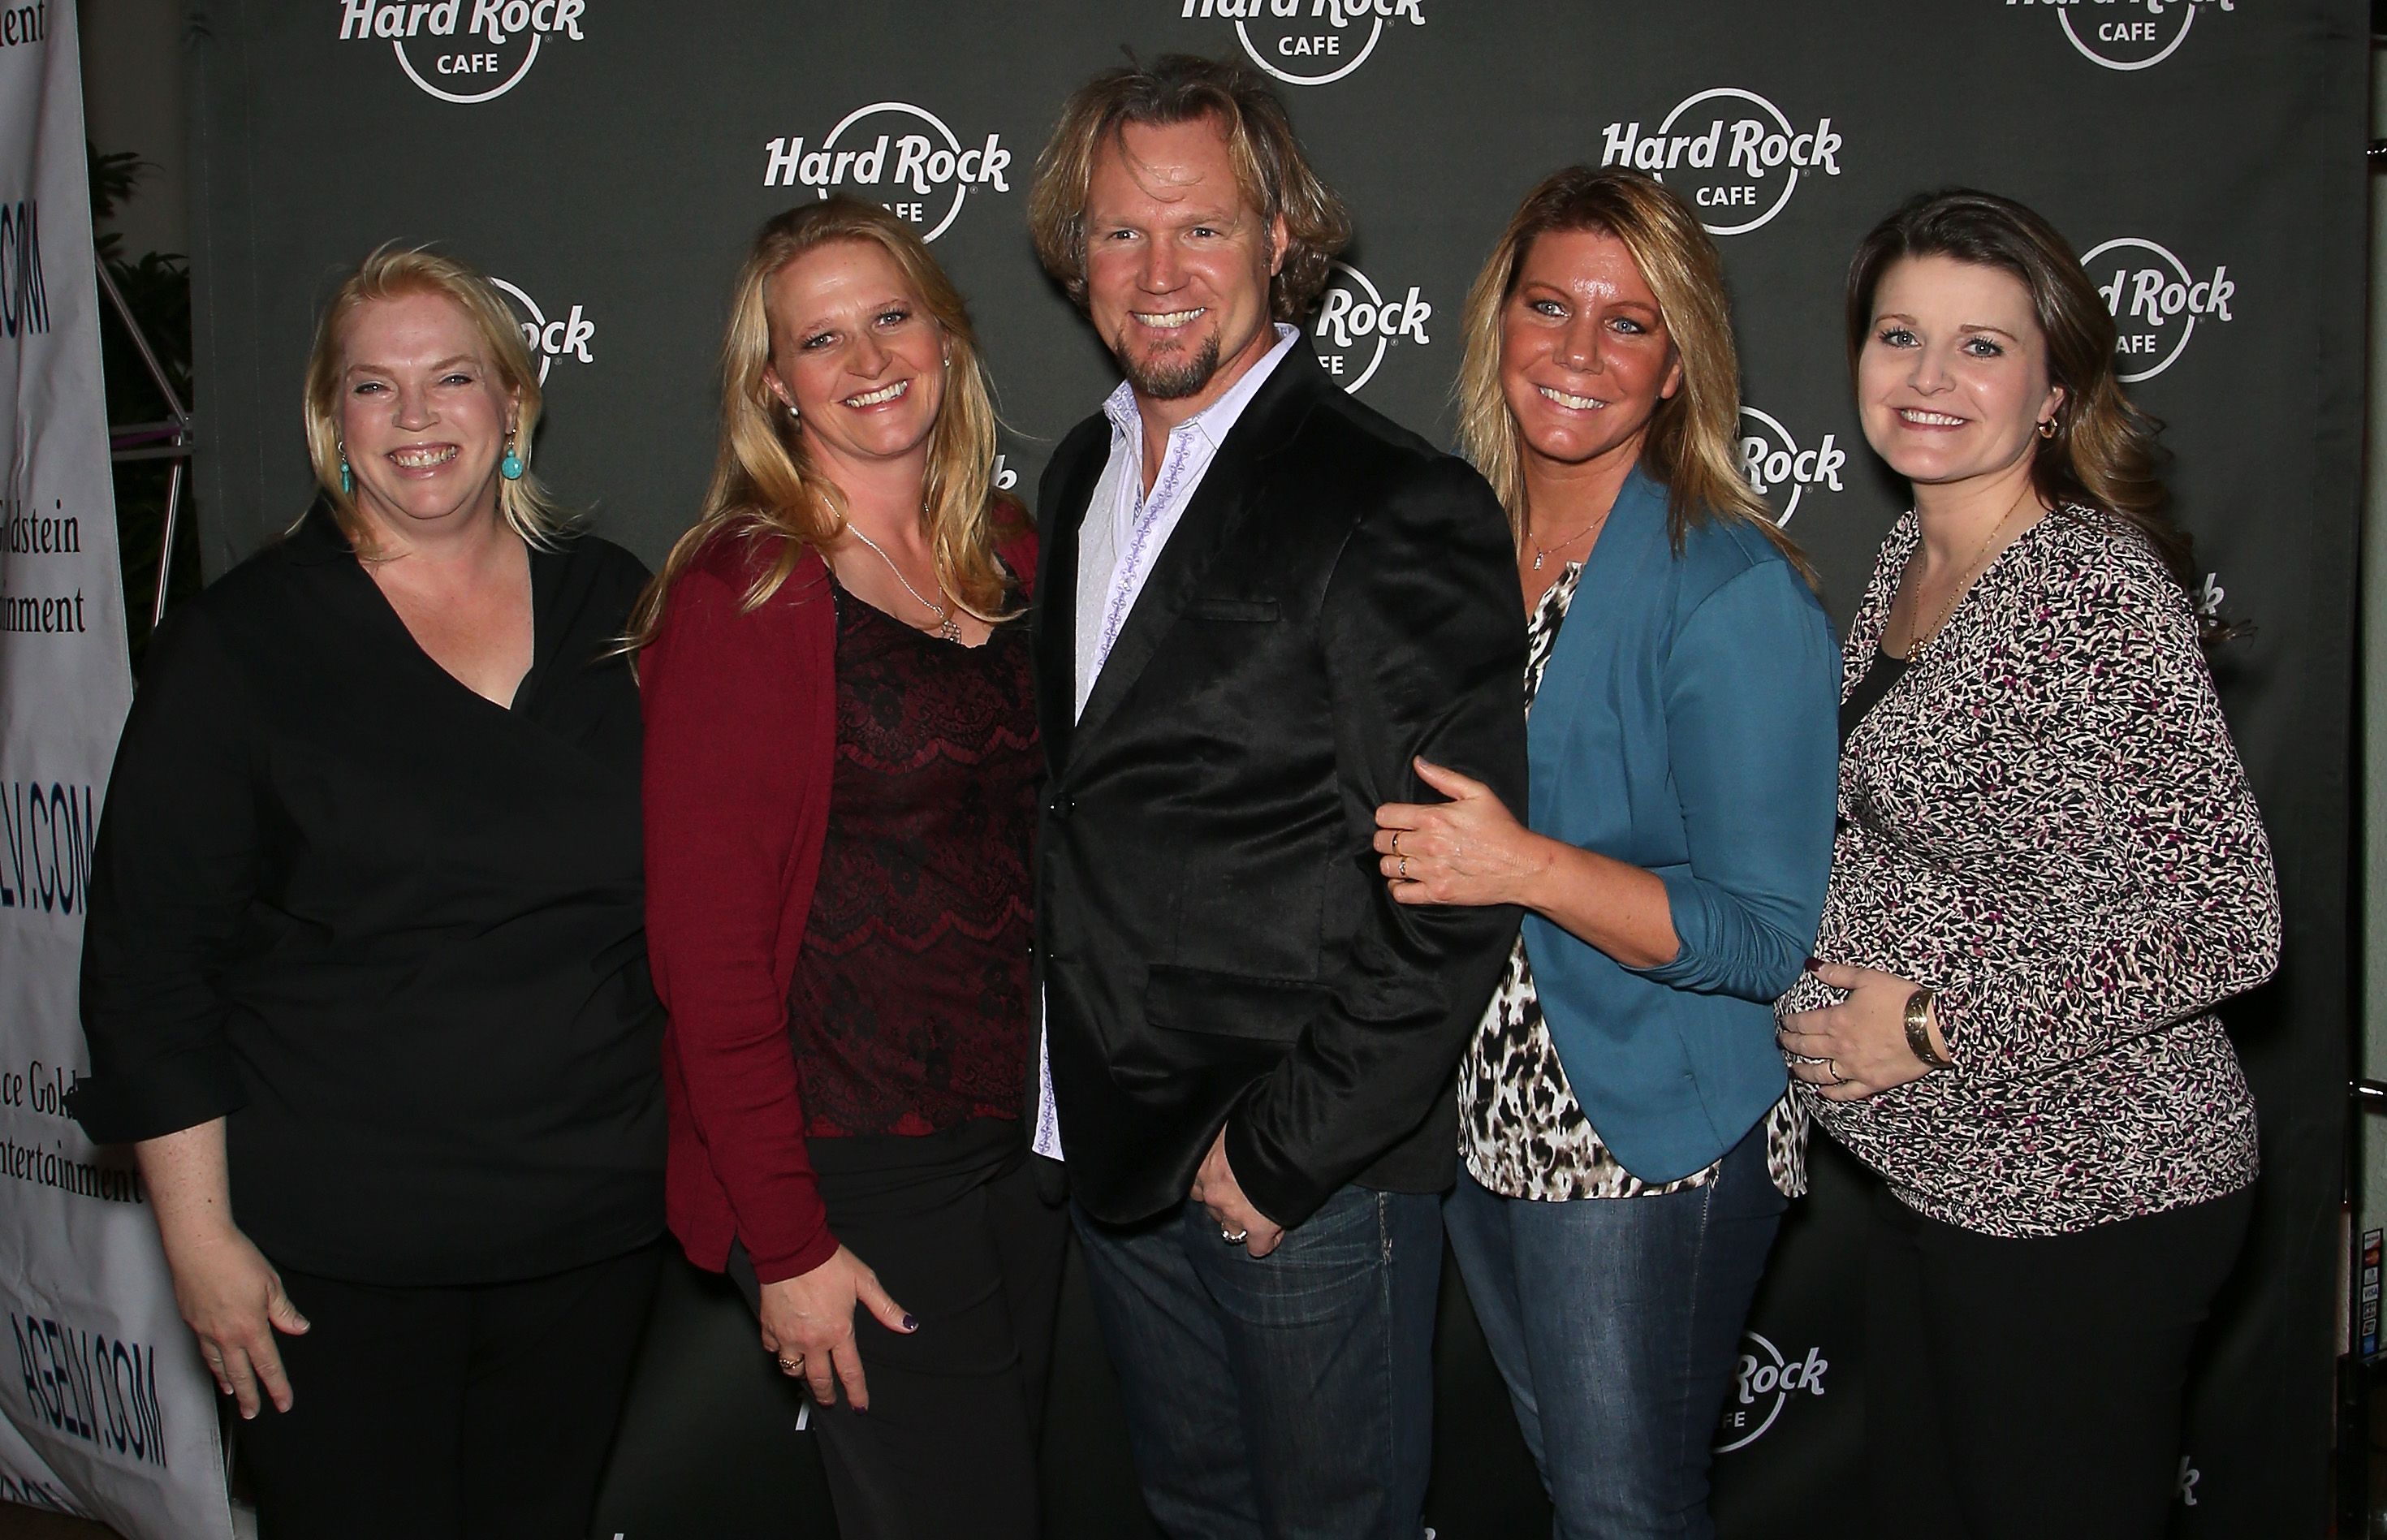 Kody Brown and his wives, Janelle Brown, Christine Brown, Meri Brown and Robyn Brown, during a Hard Rock Cafe Las Vegas event at Hard Rock Hotel's 25th anniversary celebration on October 10, 2015 in Las Vegas, Nevada. | Source: Getty Images